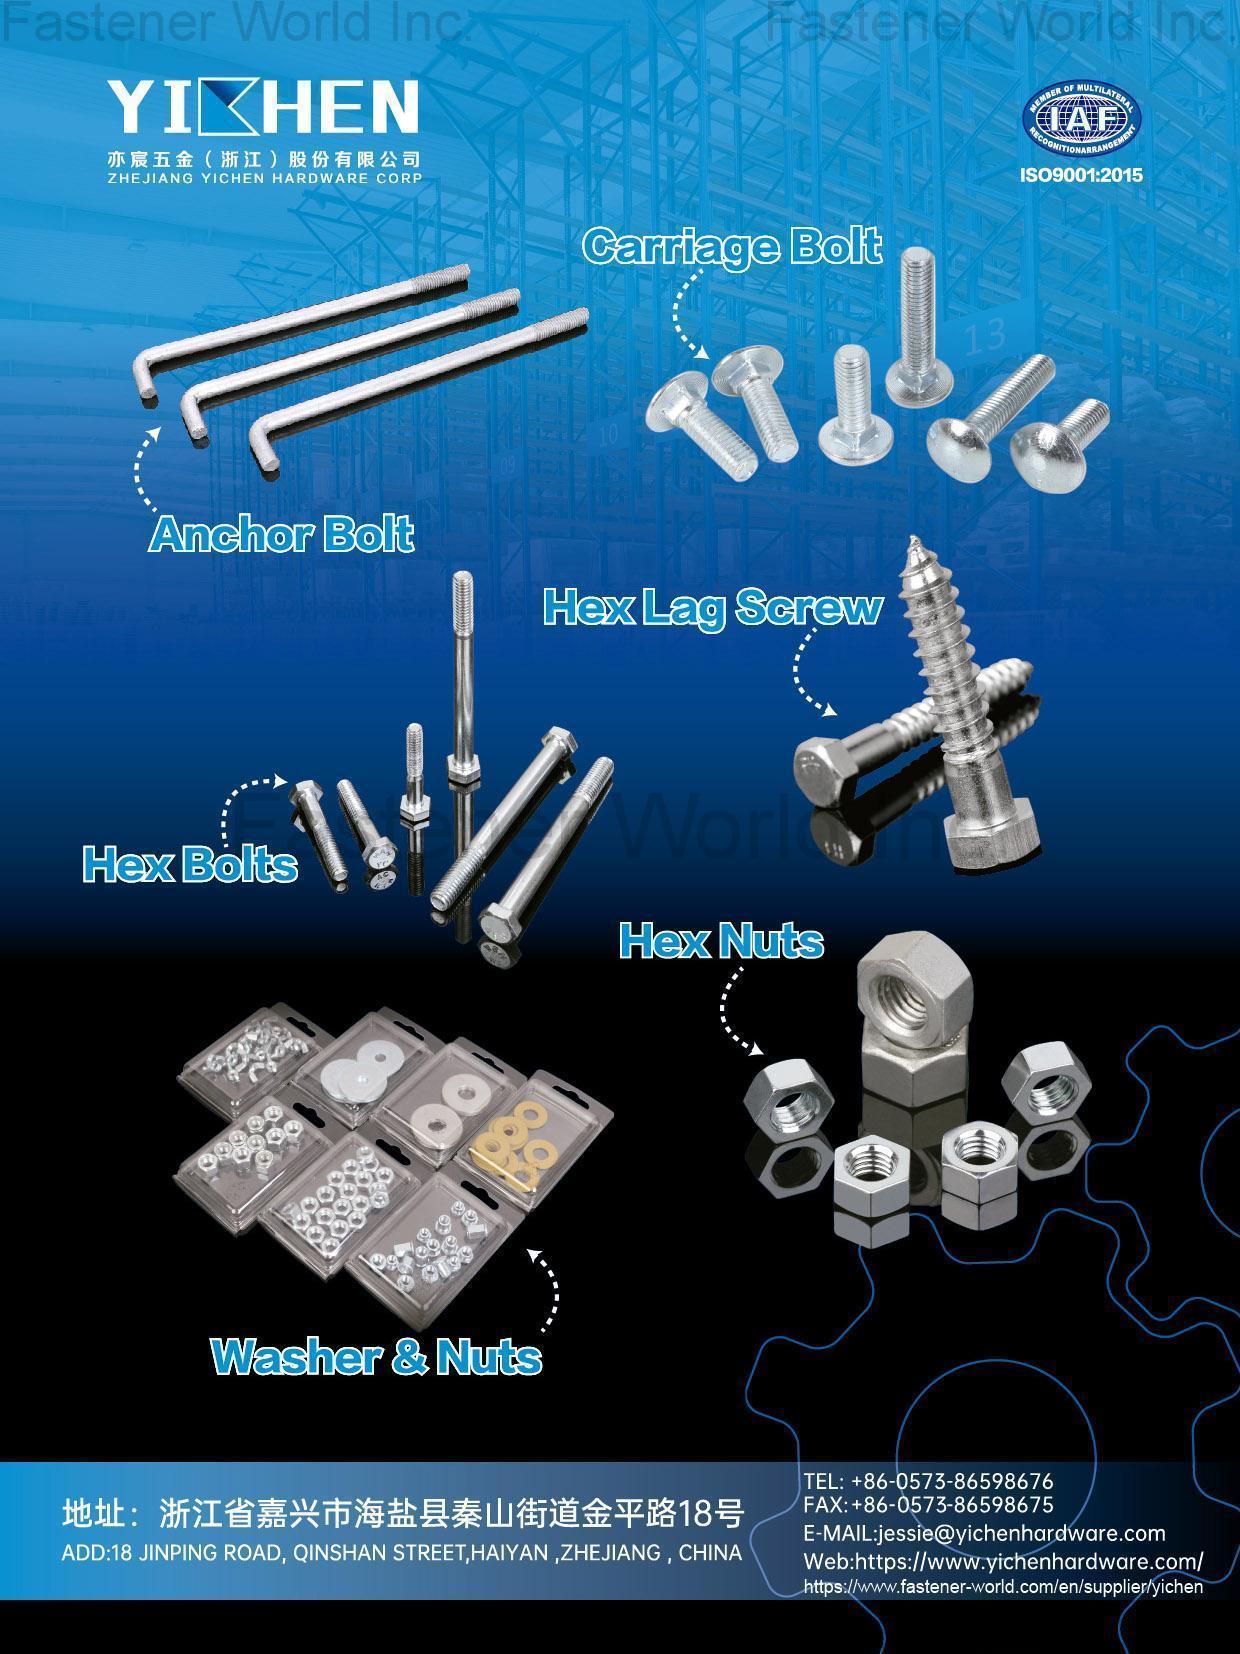 ZHEJIANG YICHEN HARDWARE CORP. , Carriage Bolts, Anchor Bolts, Hex Lag Screws, Hex Bolts, Hex Nuts, Washer & Nuts Wood Screws, Hanger Screws, Eye Screws, Hot Embroidery Bolts, L Bolts, Hanger Bolts Nuts, Fasten the Screw Nuts, Rivet Nuts Gasket